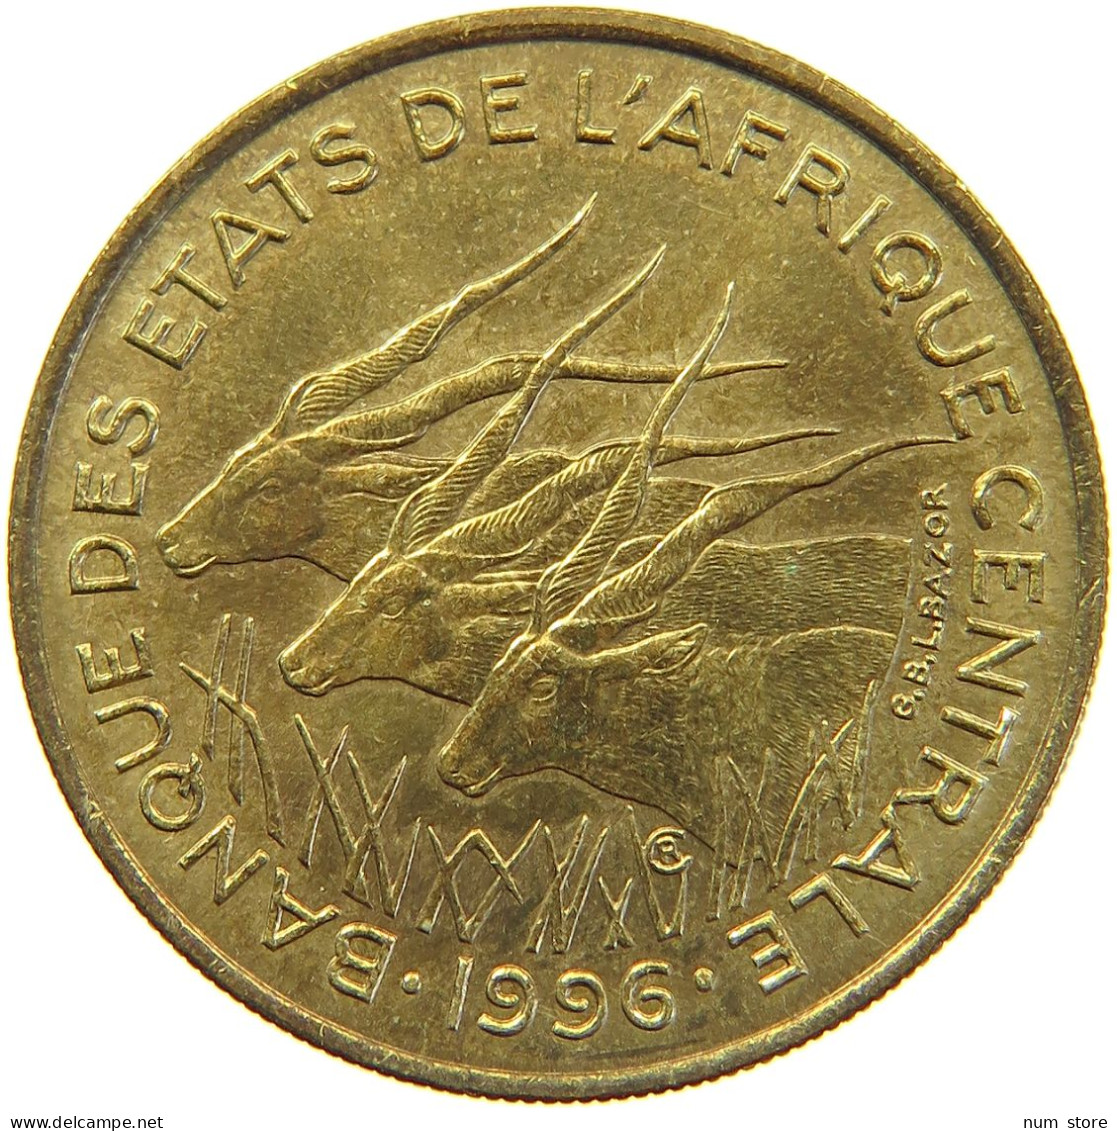 CENTRAL AFRICAN STATES 25 FRANCS 1996  #s022 0203 - República Centroafricana